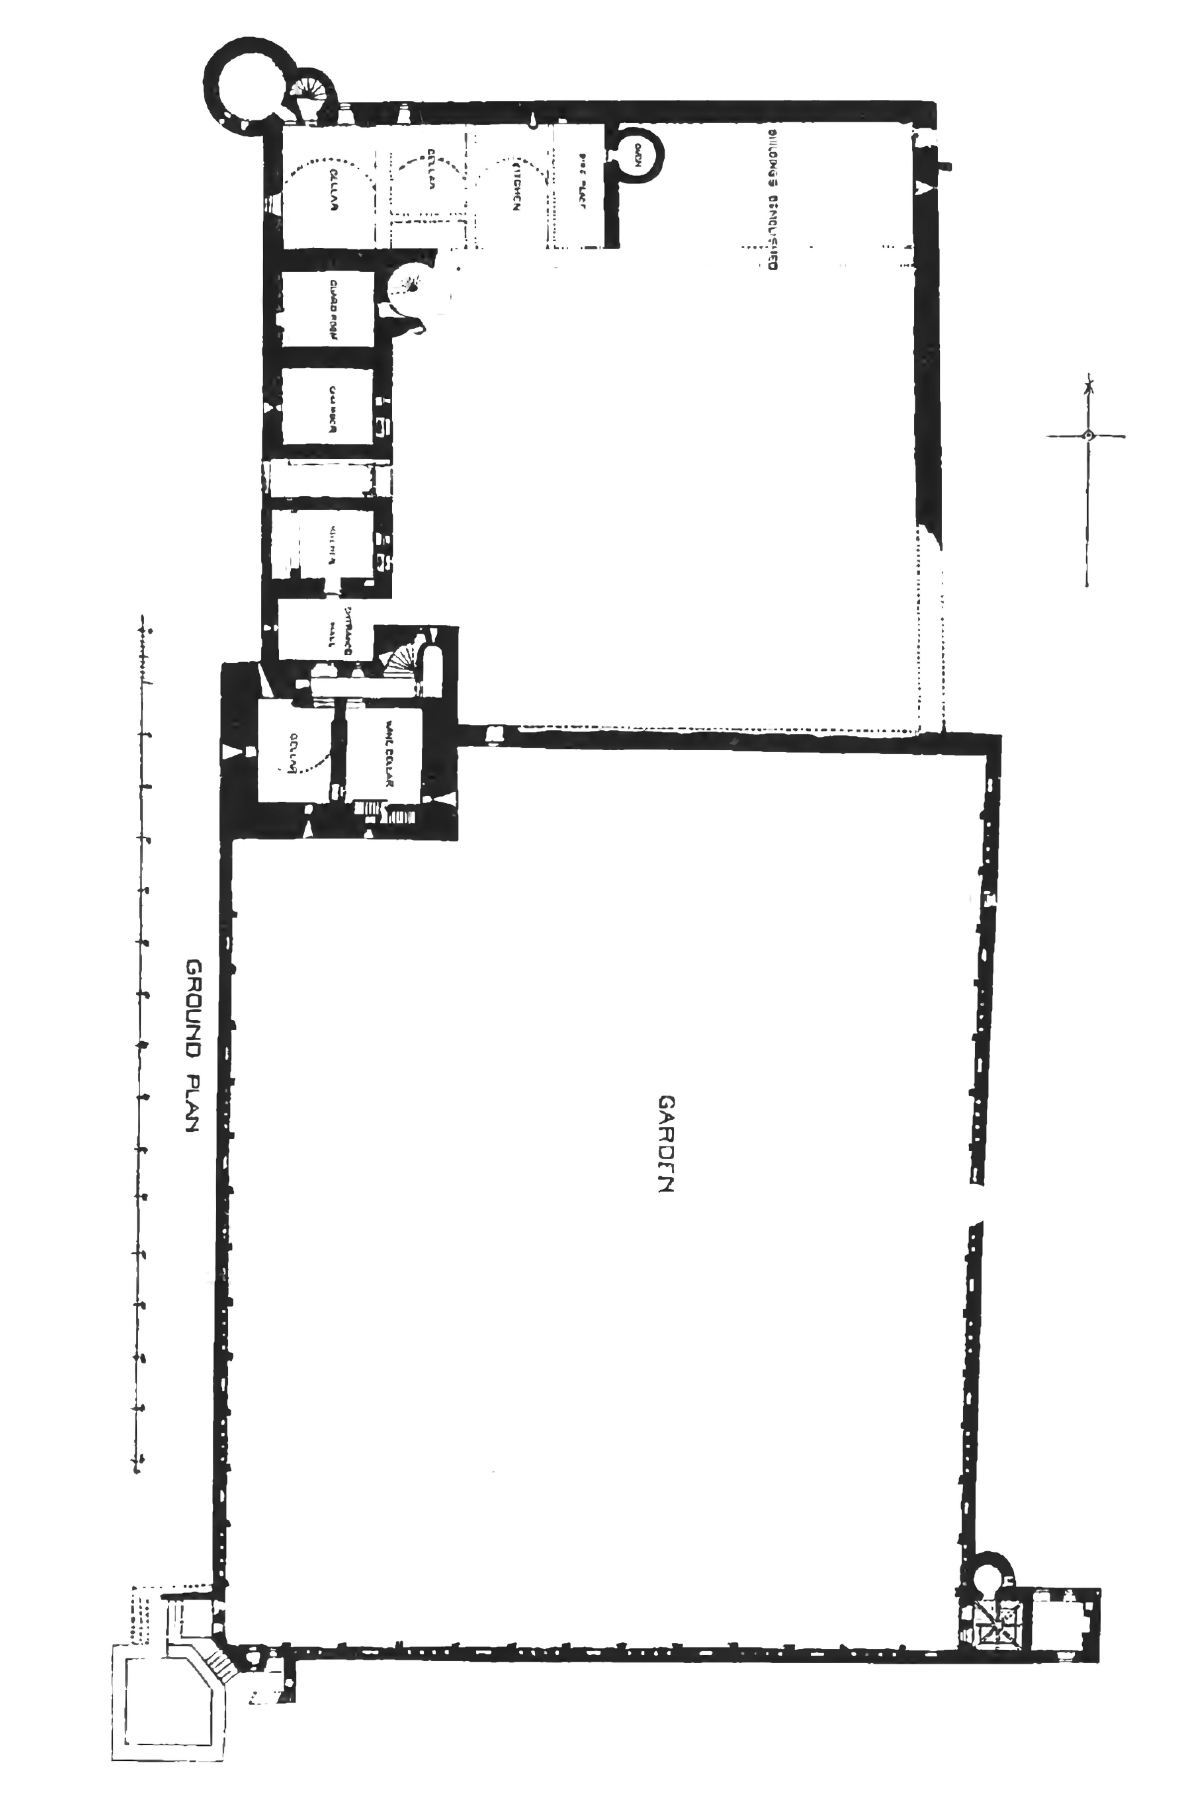 Edzell Castle, Ground Floor Plan, from MacGibbon and Ross: The Castellated and Domestic Architecture of Scotland (Edinburgh 1887)